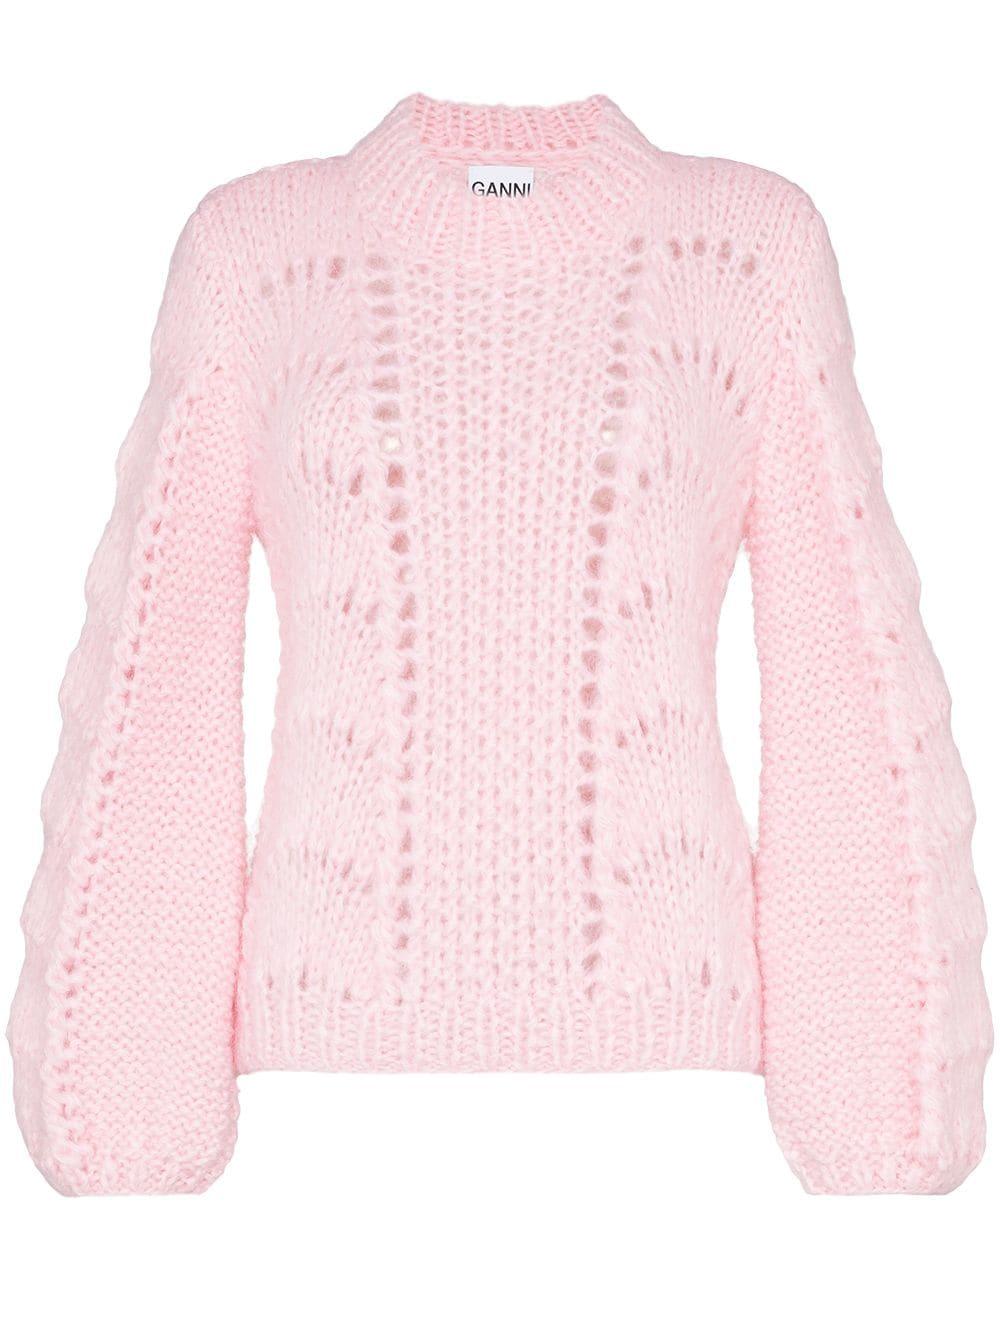 Ganni Julliard Open-knit Mohair And Wool Jumper in Pink - Lyst